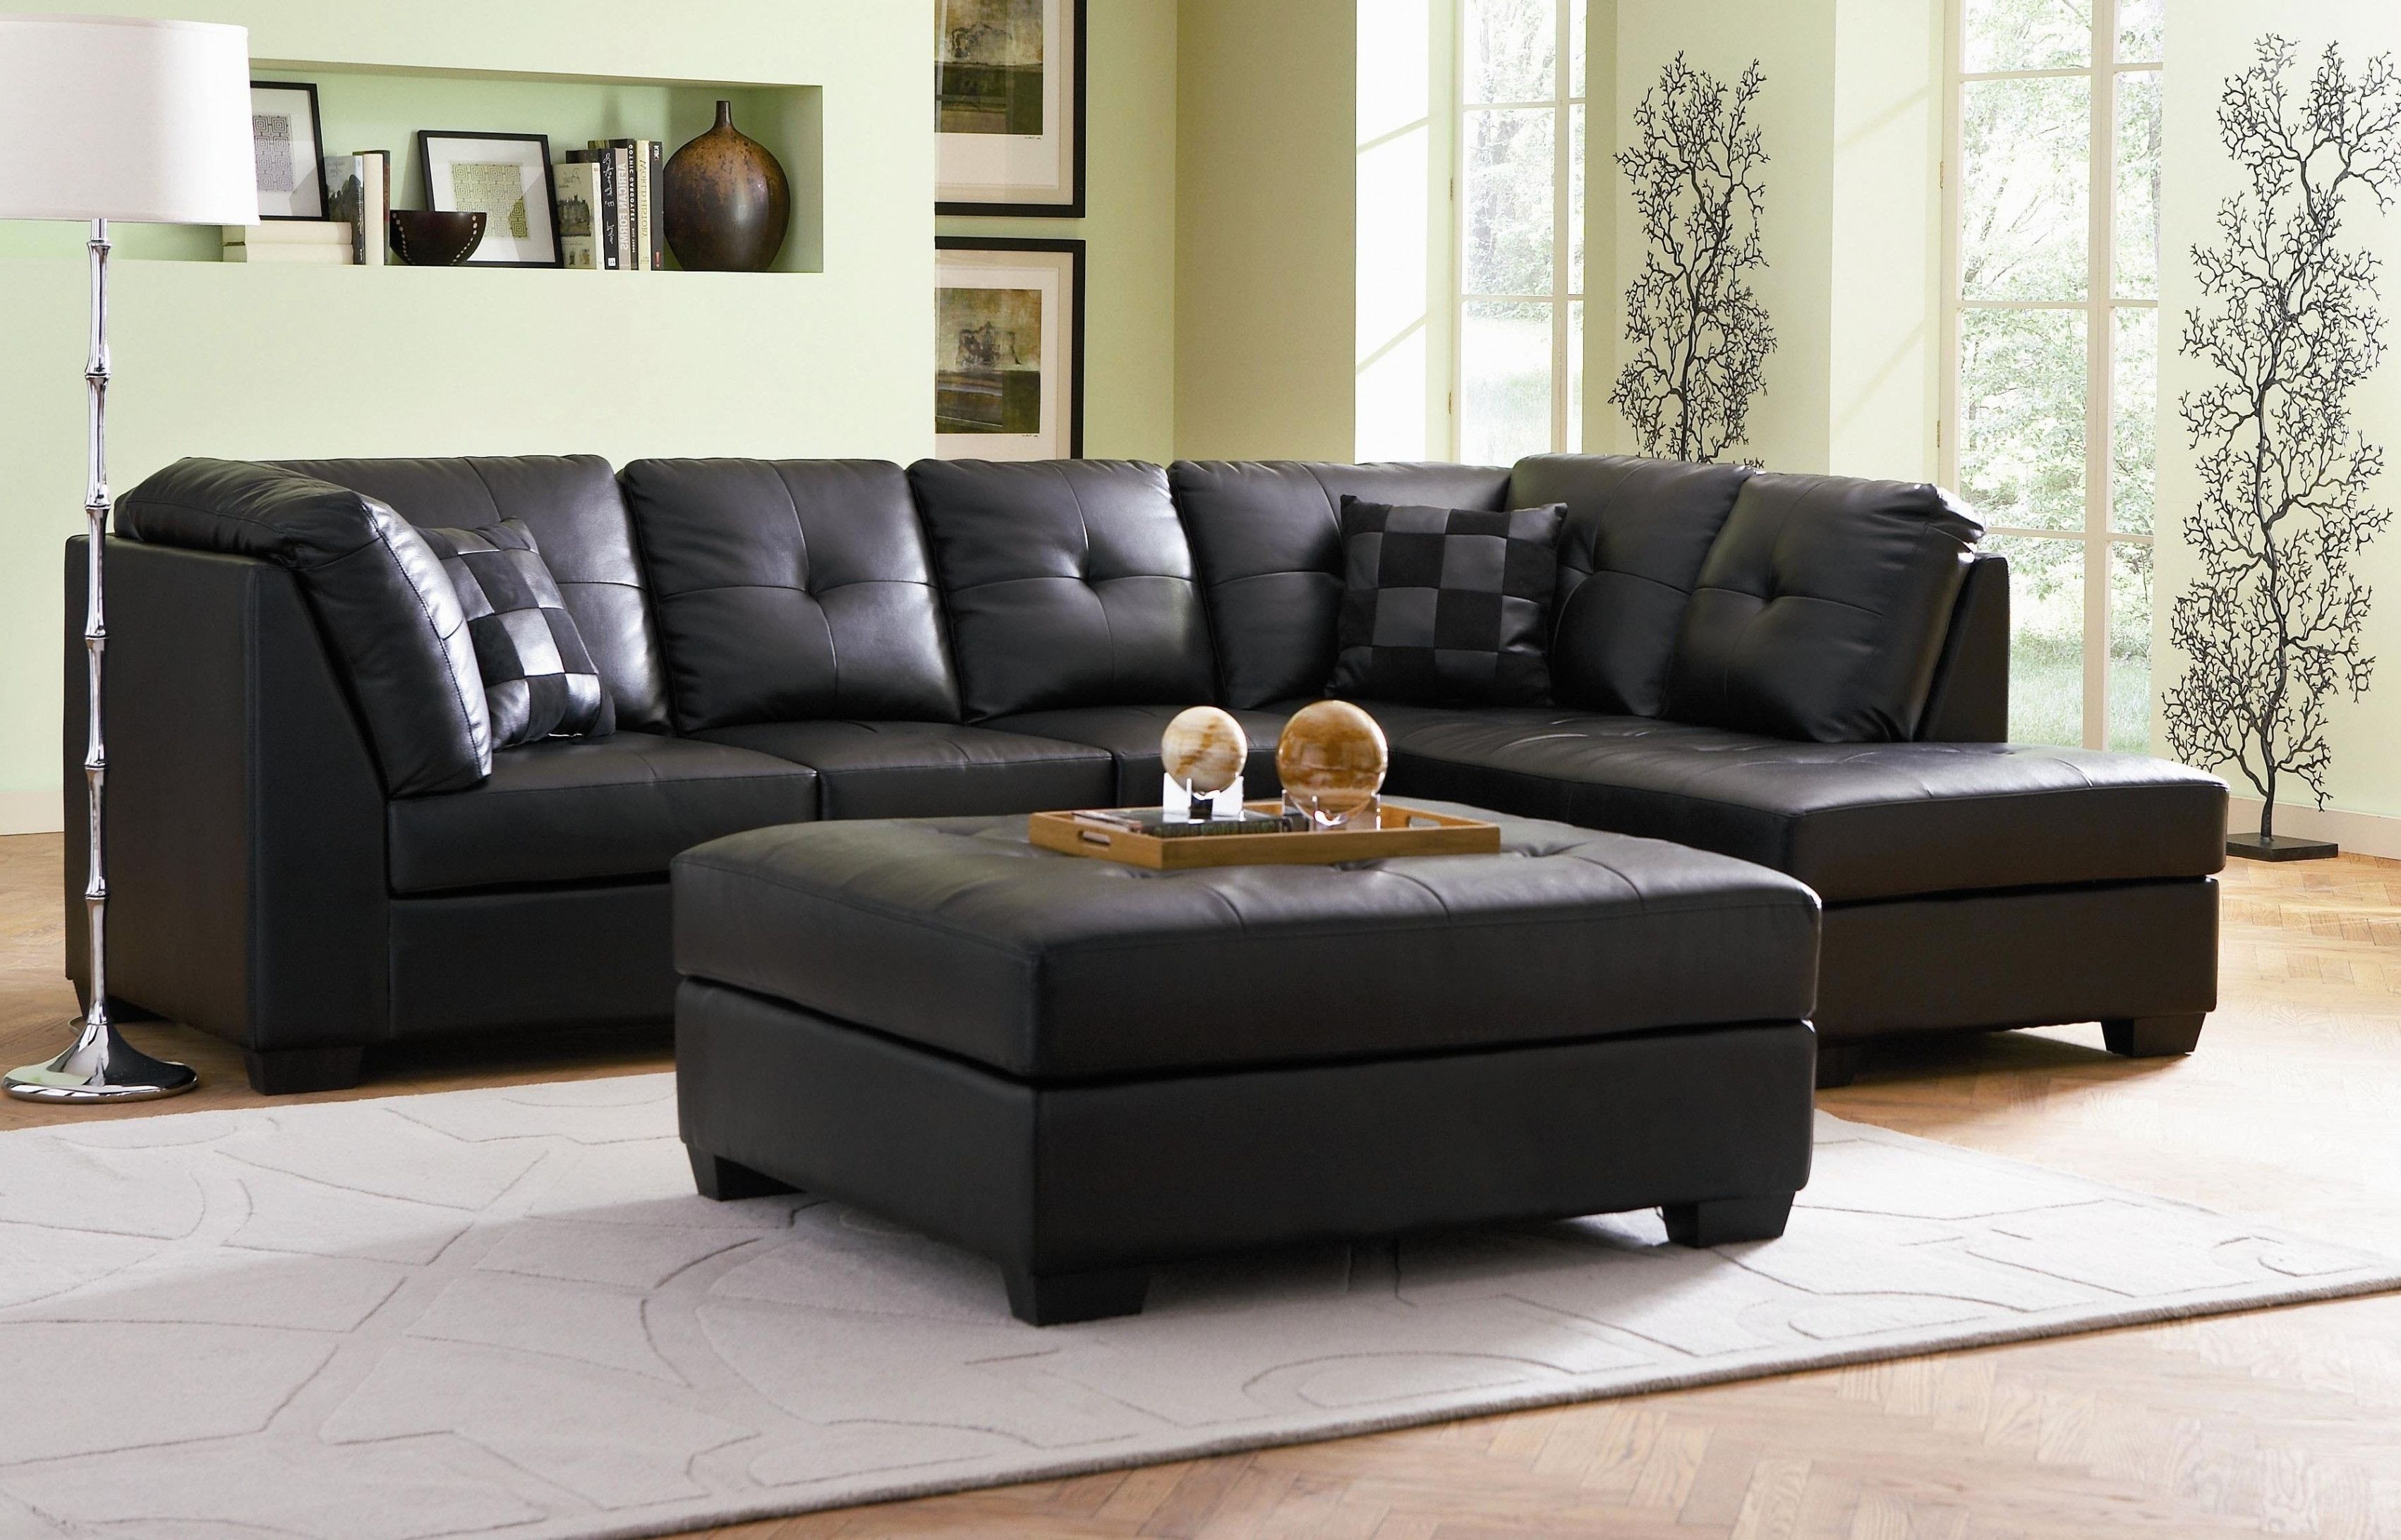 Furniture Magnificent Couch Under 200 Best Of Sofa Elegant With Sectional Sofas Under 200 